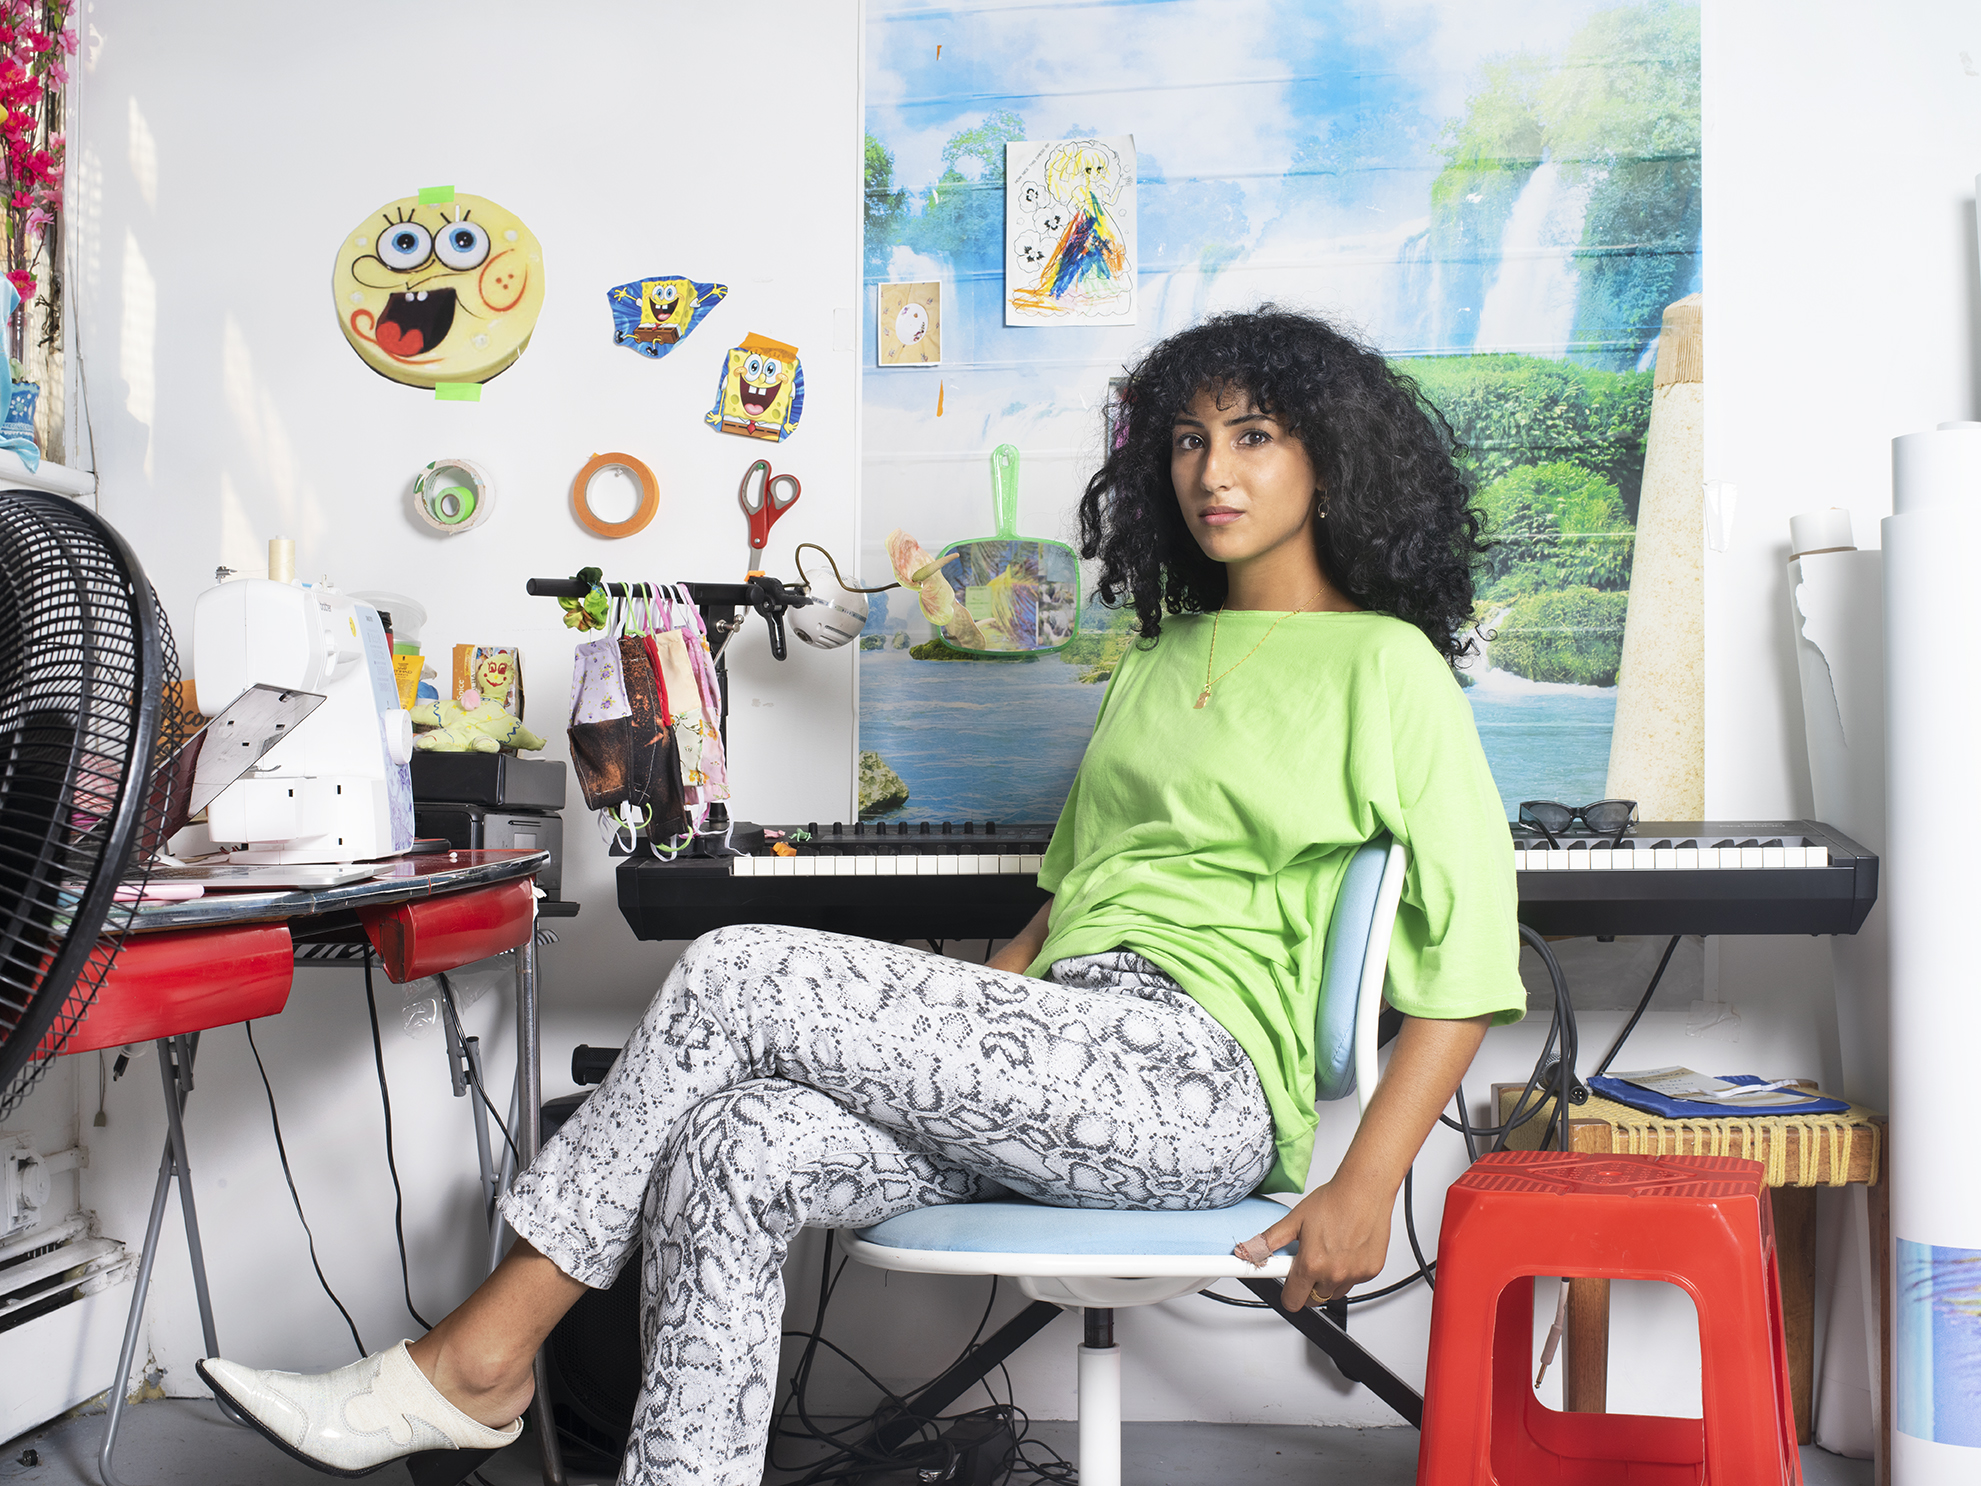 A photograph of Farah Al-Qasimi in her studio. Farah is seated on a chair in the foreground looking at the camera. There is a piano keyboard behind her and other ephemera hanging on the wall behind her.